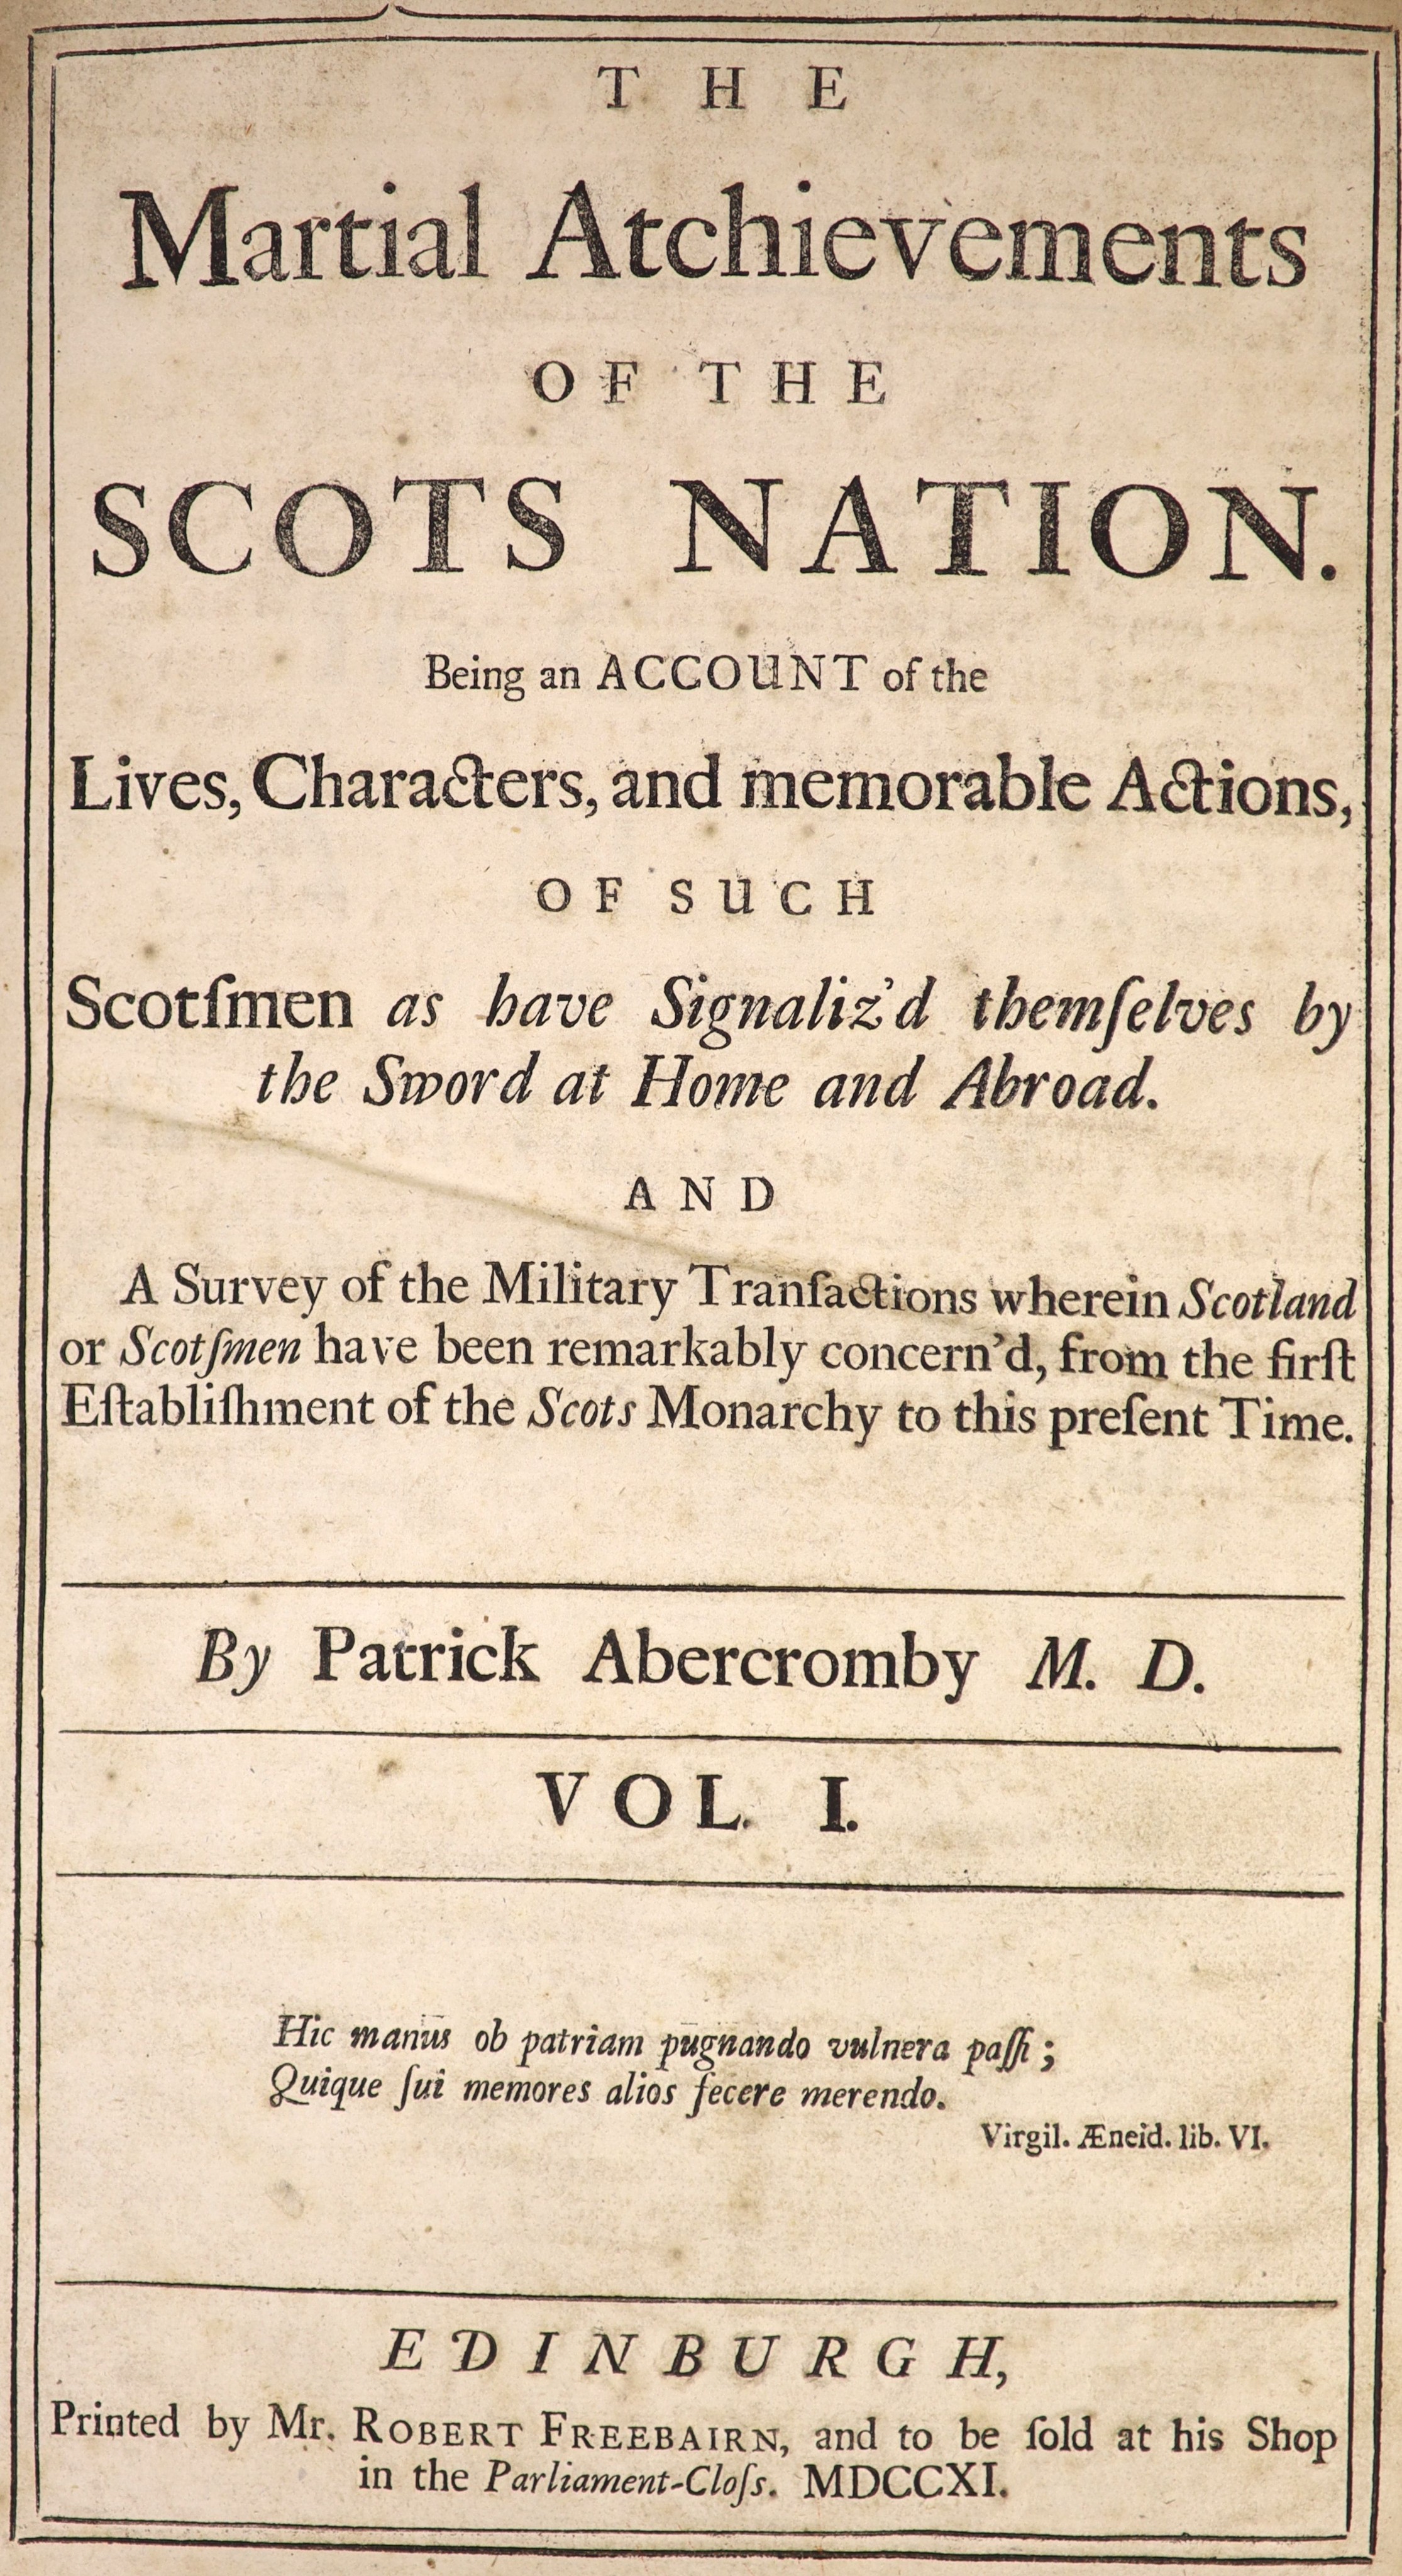 Abercromby, Patrick - The Martial Achievements of the Scots Nation…2 vols. Marbled calf, panelled spines with 2 morocco labels. Sprinkled edges. 4to. Robert Freebairn, Edinburgh, 1711.